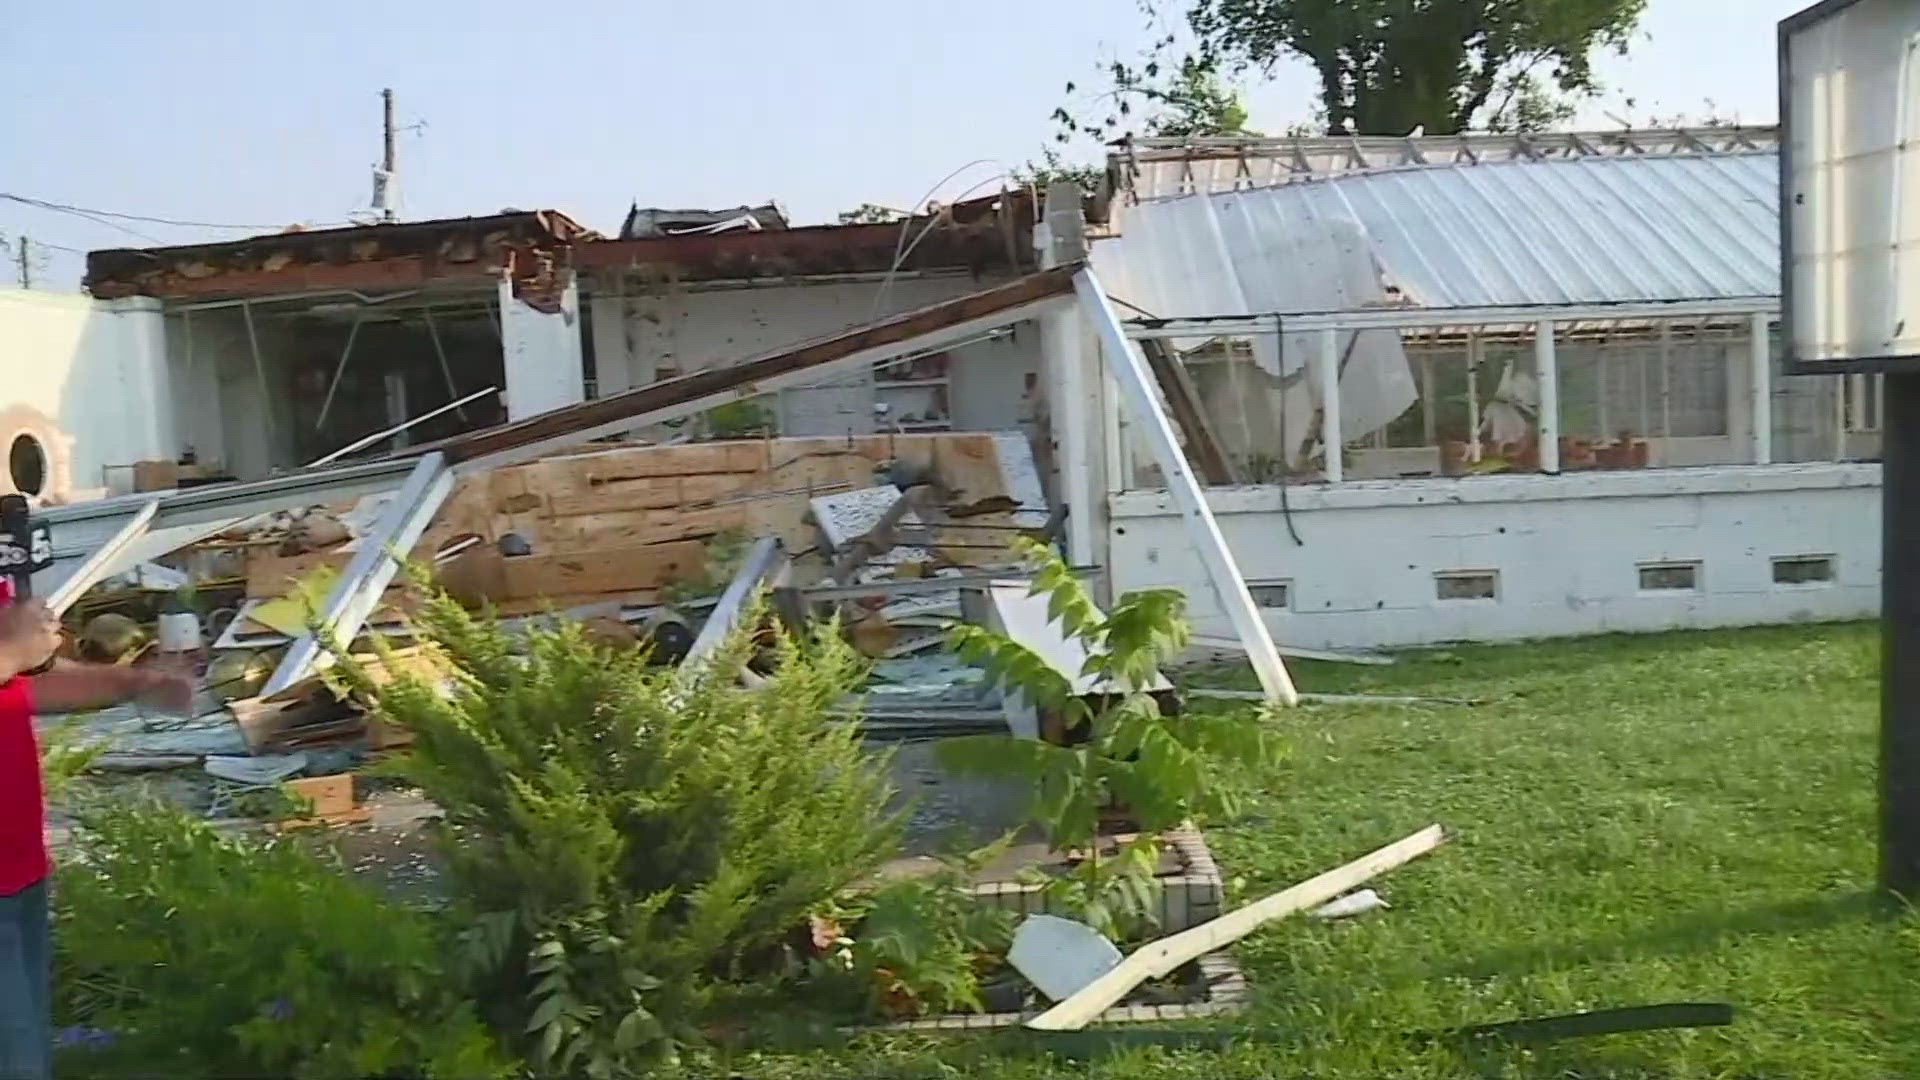 Here's a look at the damage in Rogers, Arkansas.